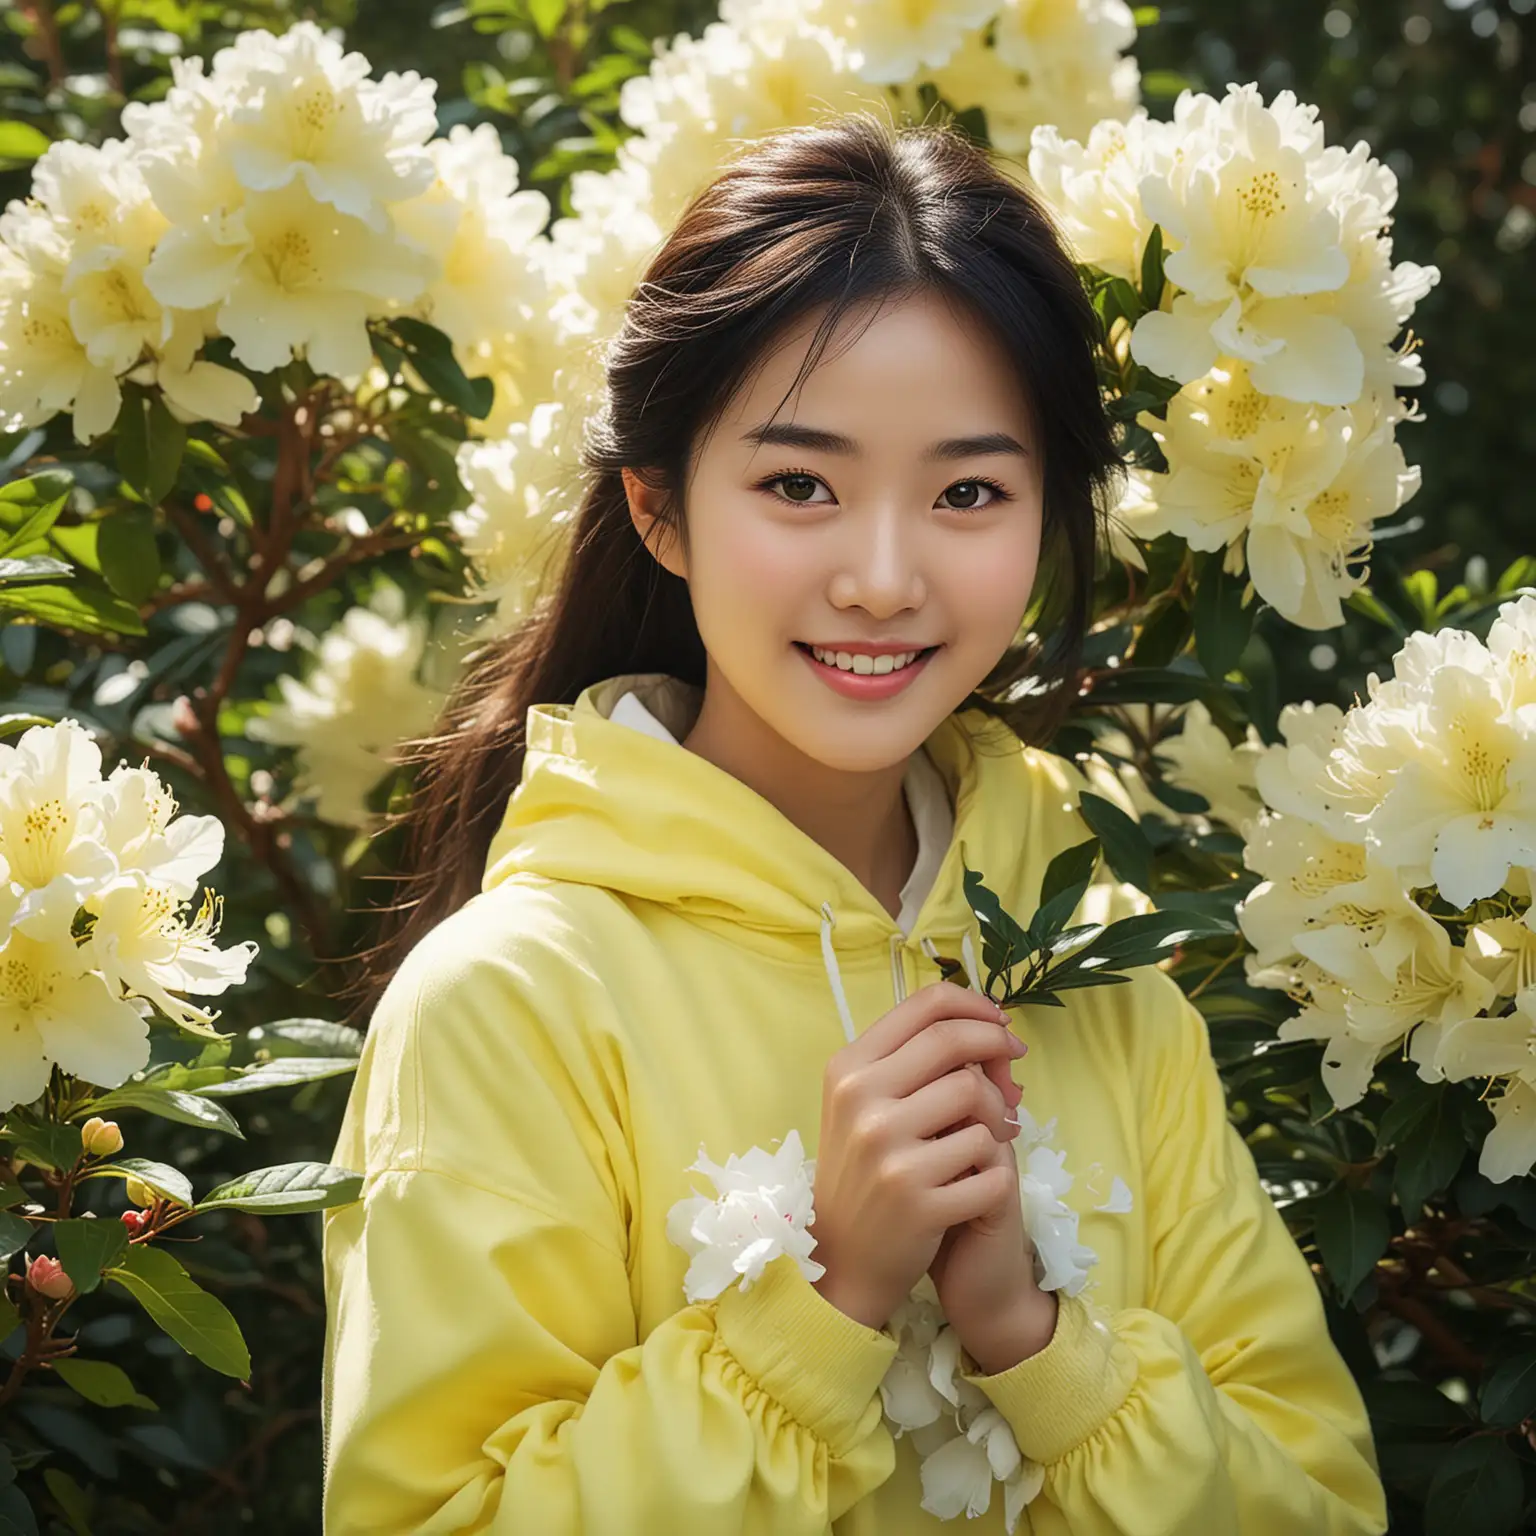 Intelligent-Chinese-Girl-Holding-White-Cloud-Rhododendron-in-Minimalist-Natural-Light